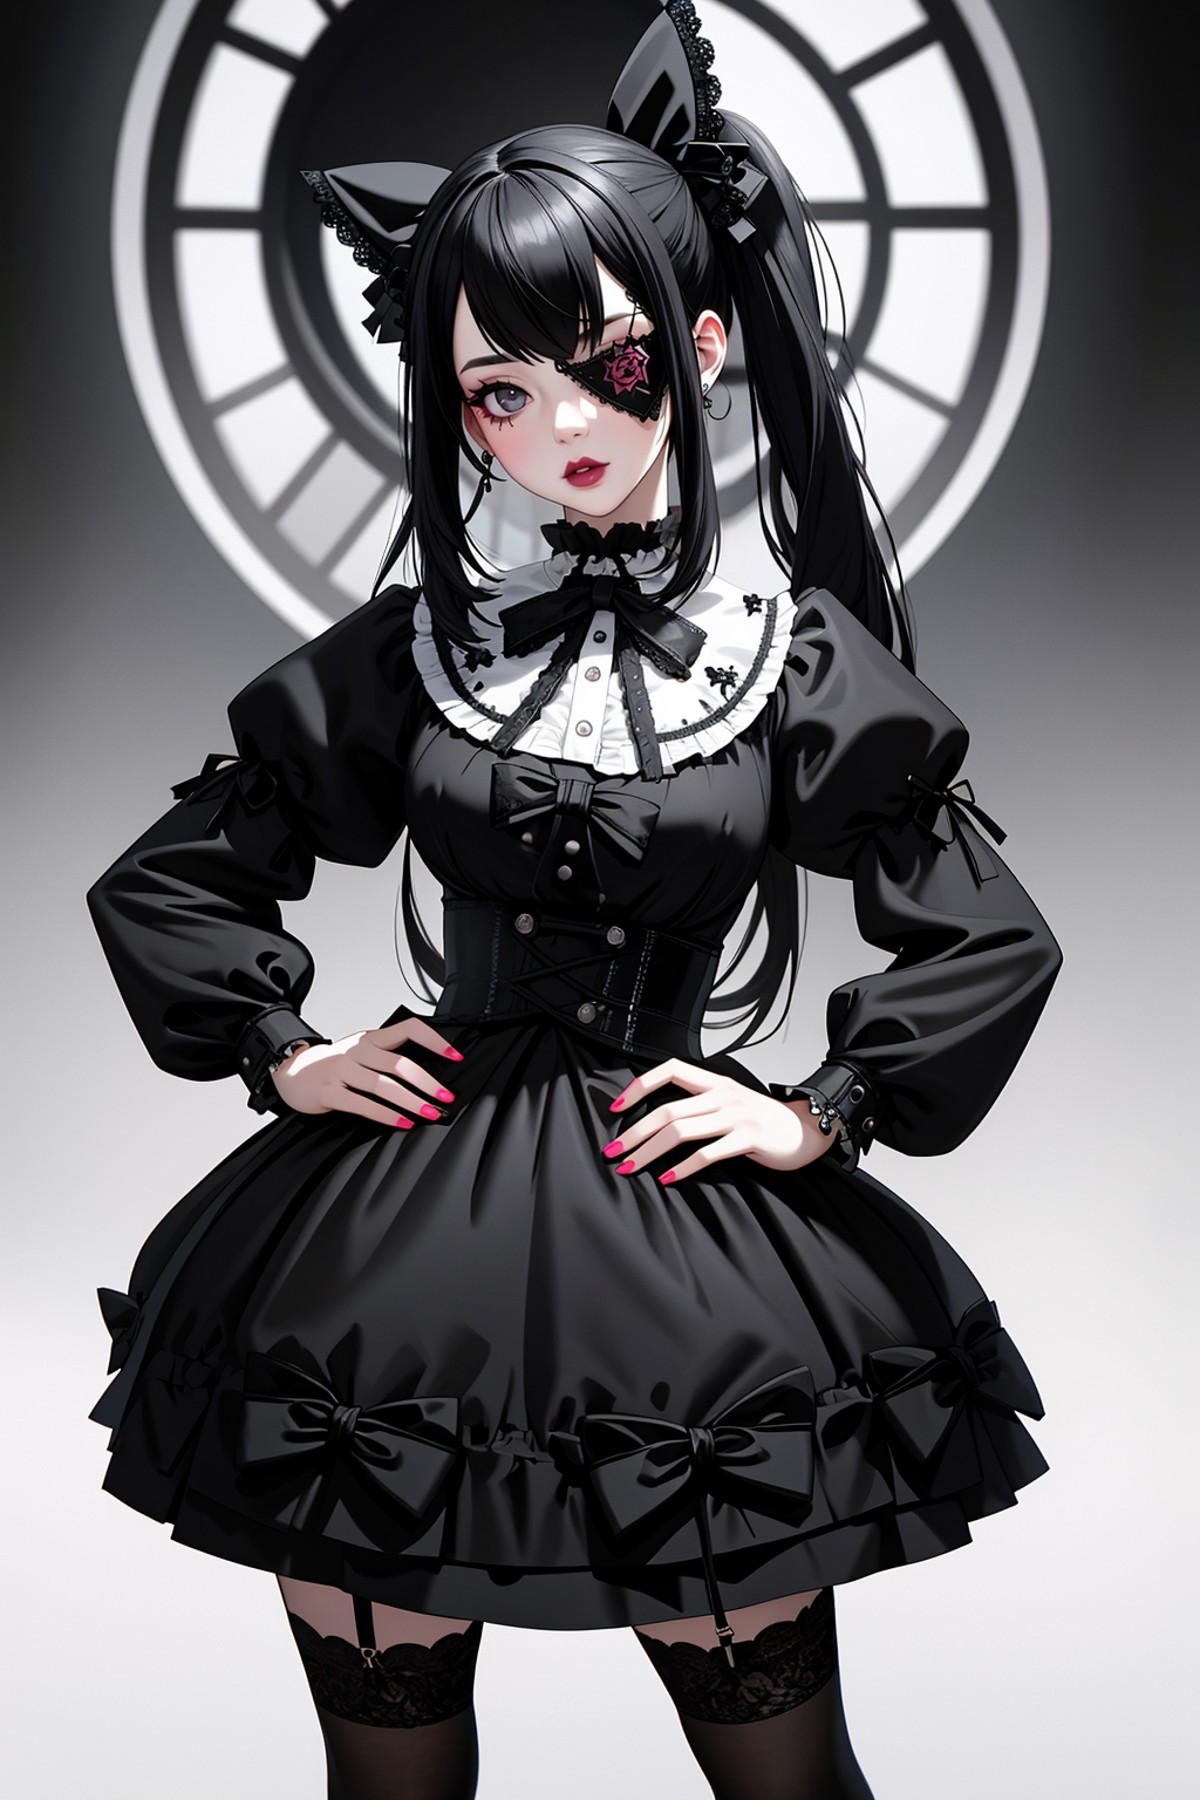 ((Masterpiece, best quality)), edgQuality,bimbo,glossy,(hands on hip)
GothGal, a woman in a black and white dress,ribbon,l...